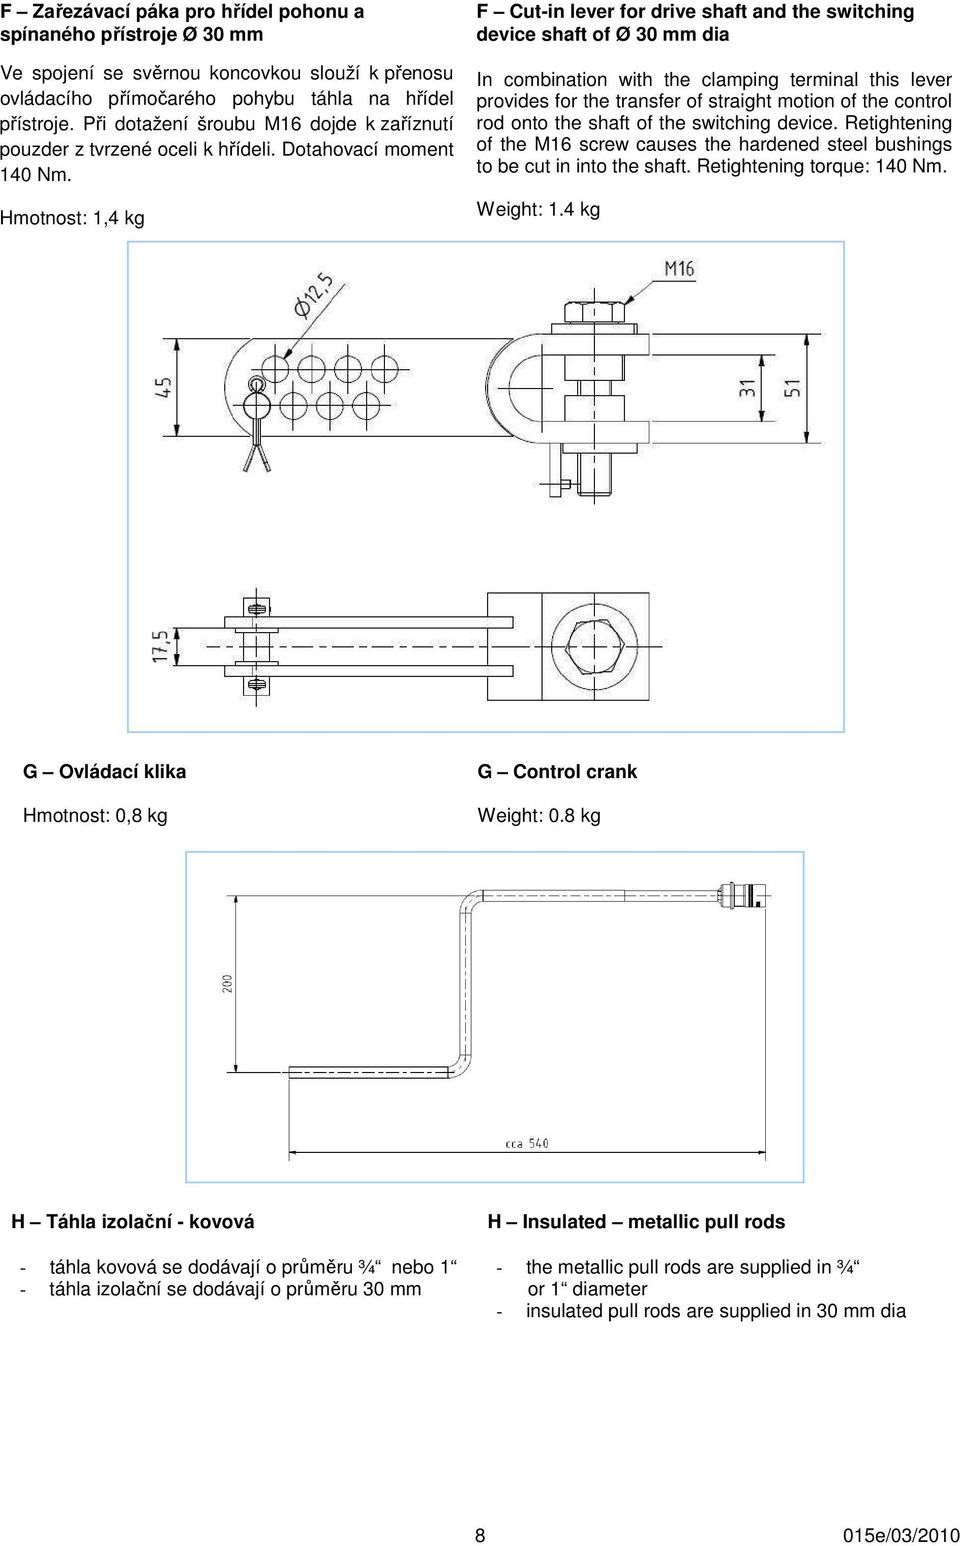 Hmotnost: 1,4 kg F Cut-in lever for drive shaft and the switching device shaft of Ø 30 mm dia In combination with the clamping terminal this lever provides for the transfer of straight motion of the